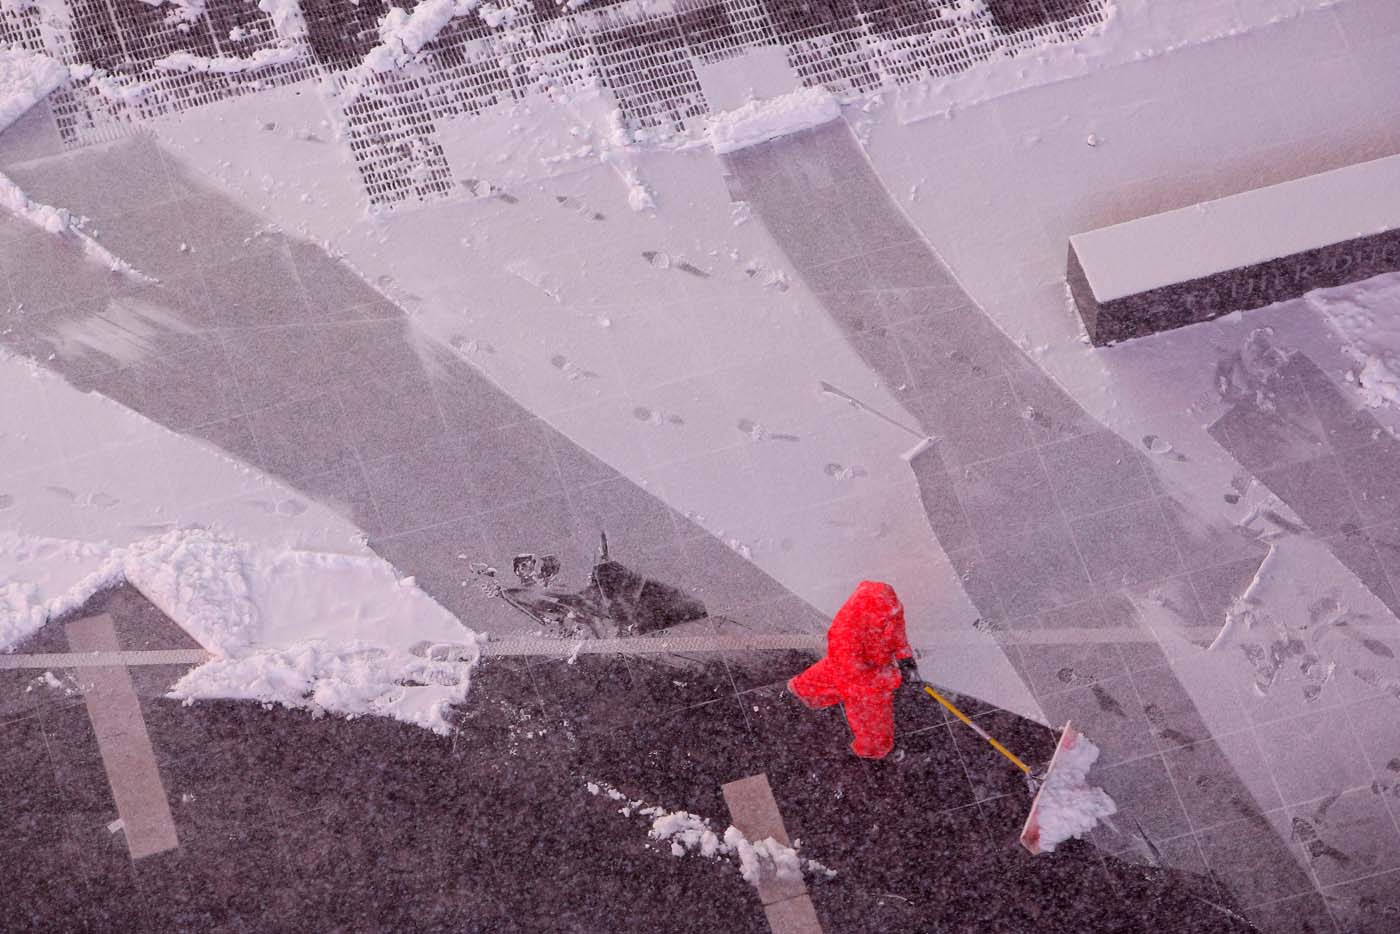 A worker clears snow in Times Square during a snow storm in Manhattan, New York, U.S., March 14, 2017. REUTERS/Andrew Kelly